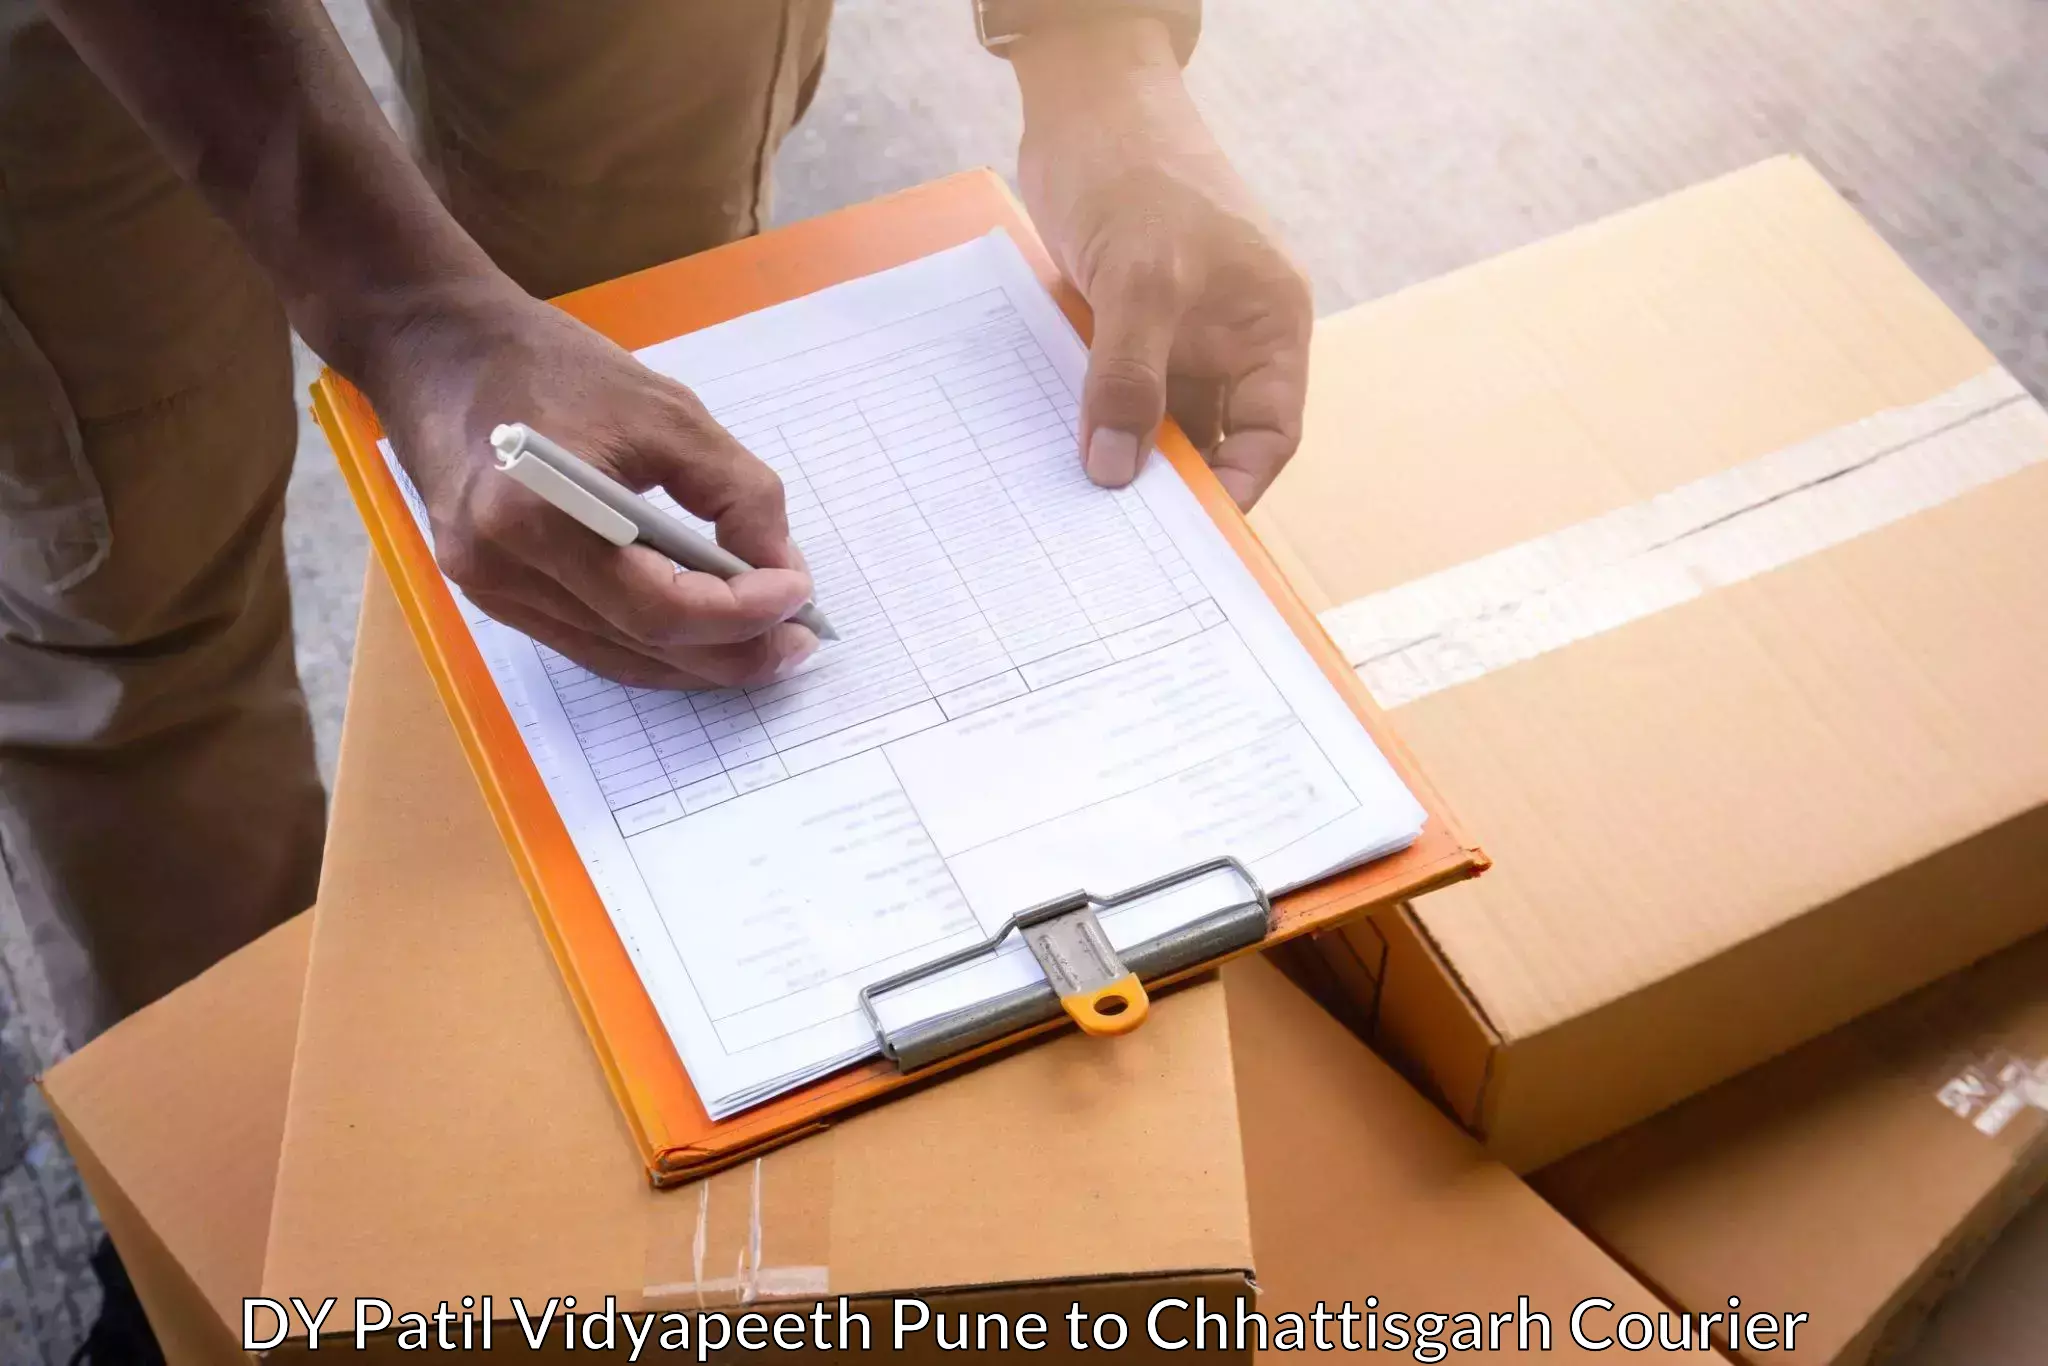 Fragile item shipping DY Patil Vidyapeeth Pune to Dharamjaigarh